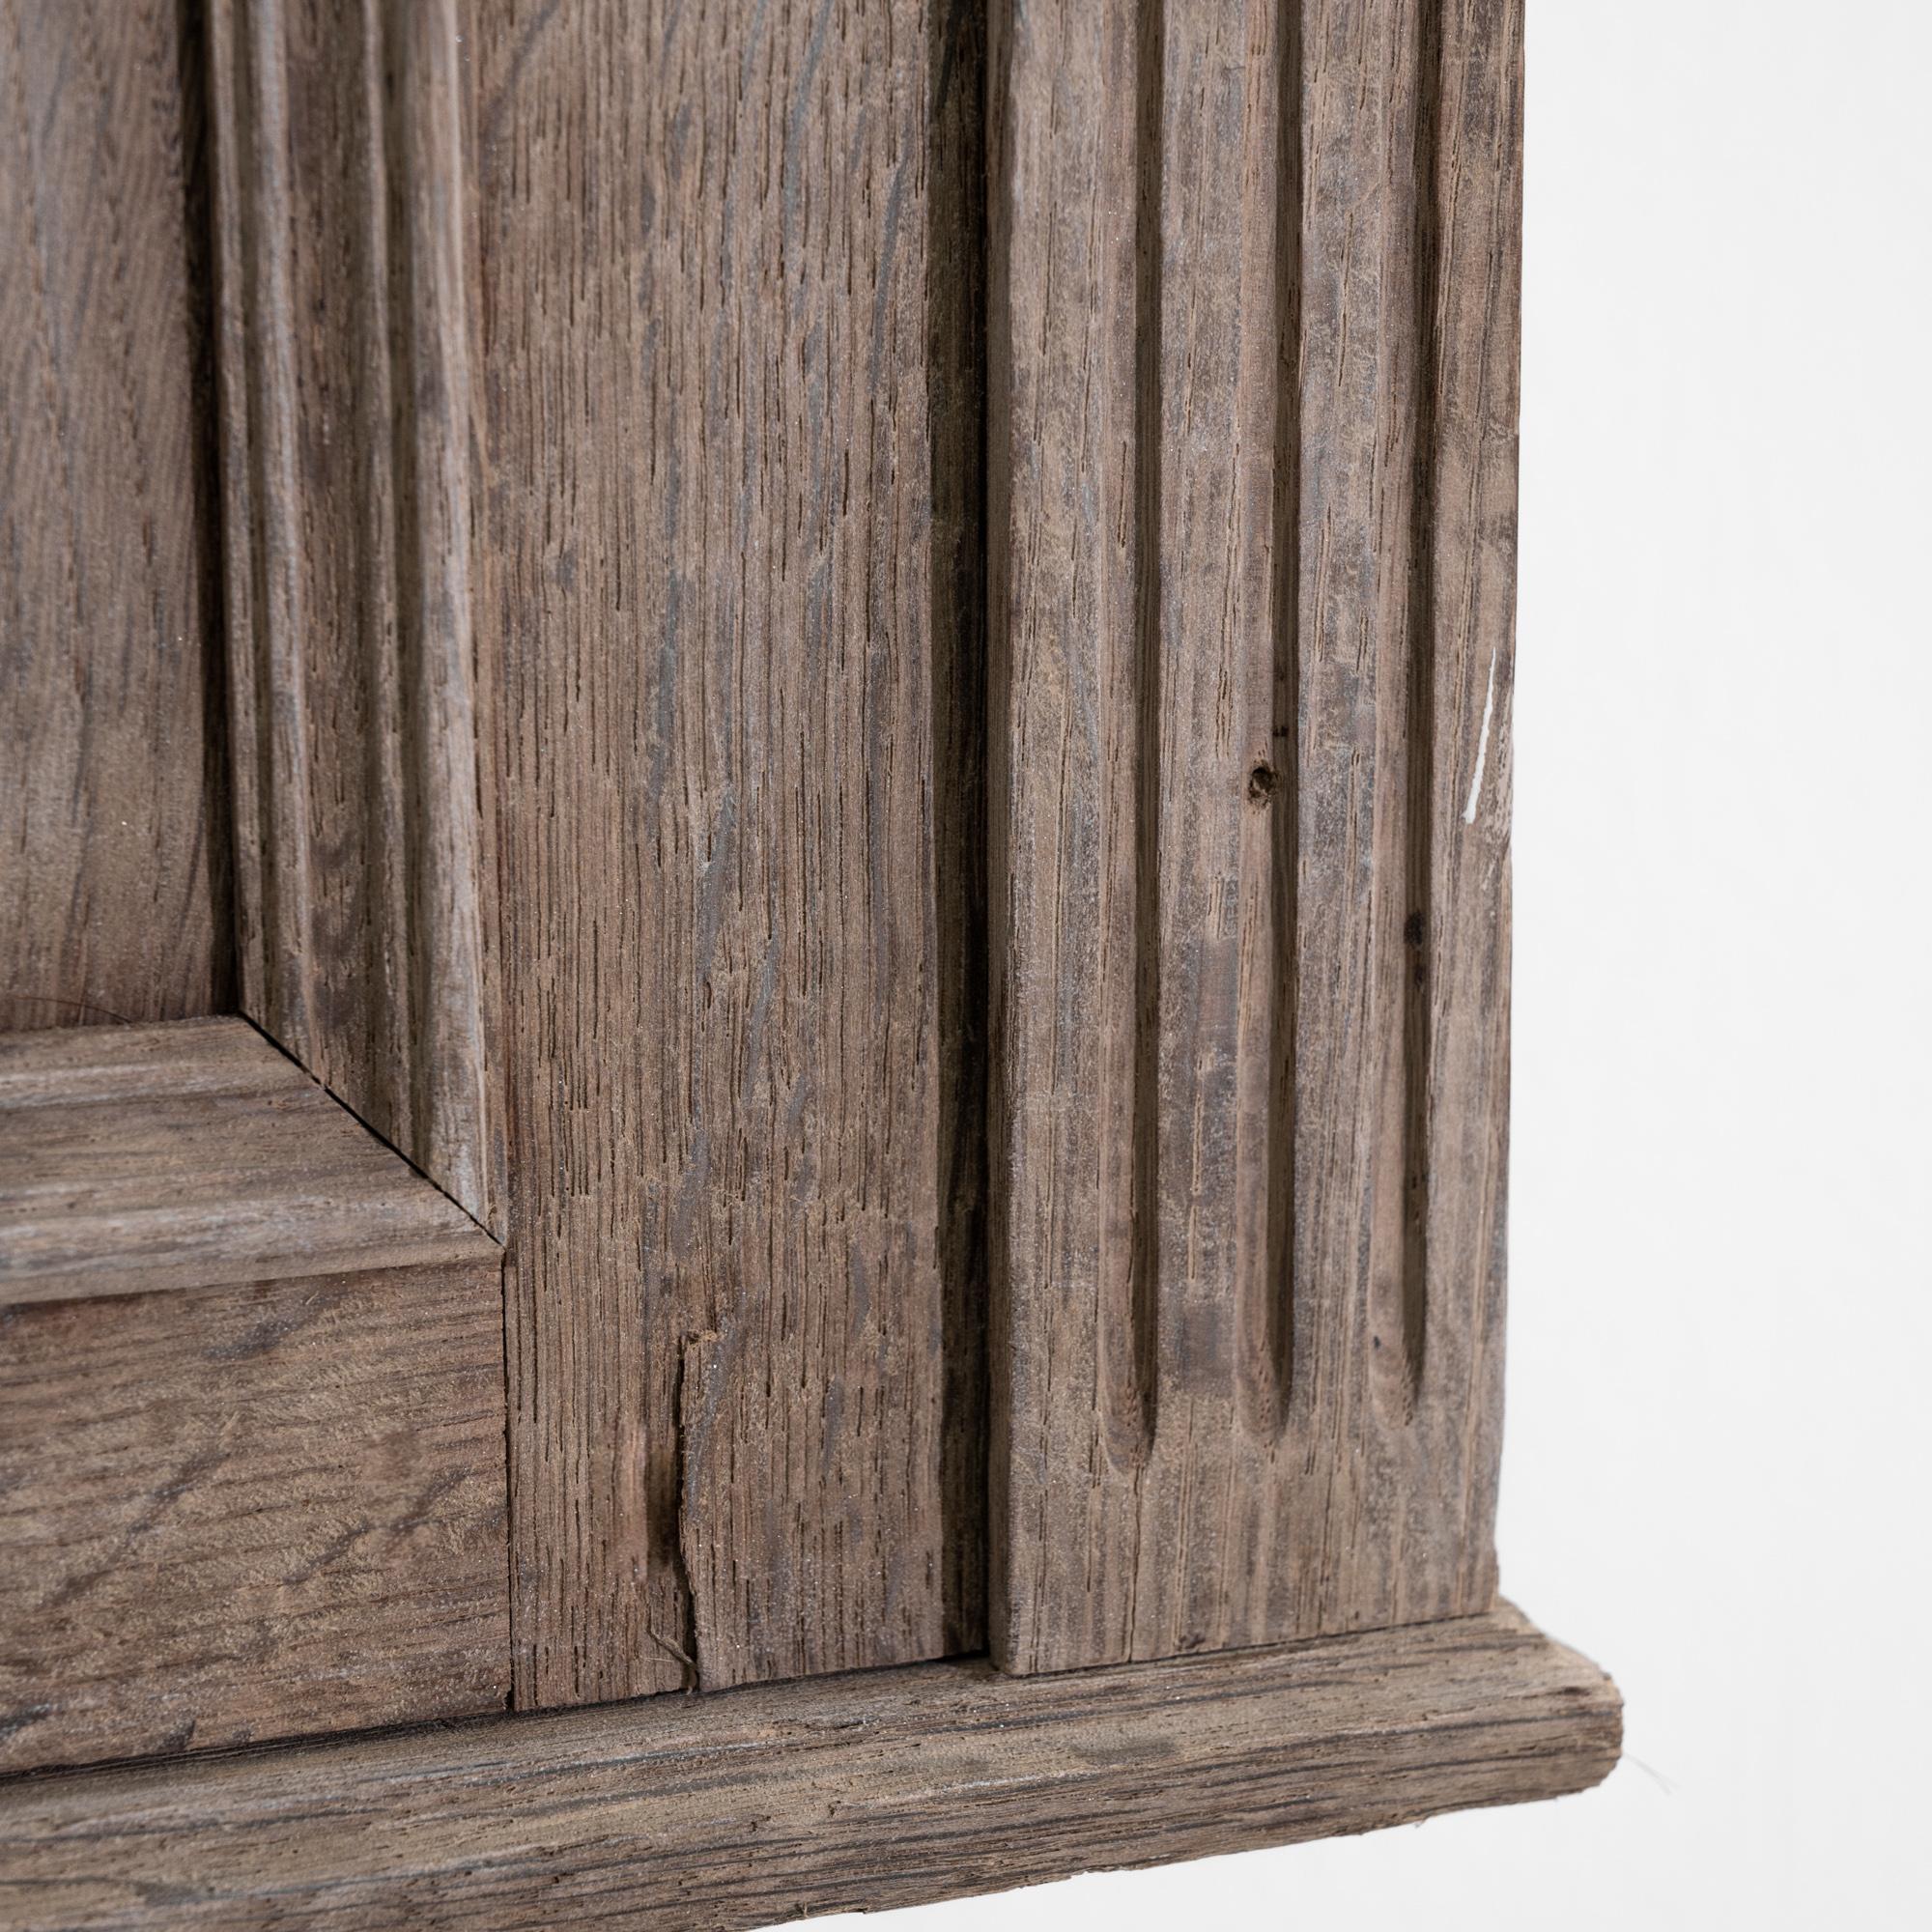 A 19th century wall cabinet from France, this antique oak cabinet sports a carved case with fluted sides, adorned with dainty finials on the top. Floral scrolls embrace a central monogram crest delineating the letters V and P interlaced, evoking a